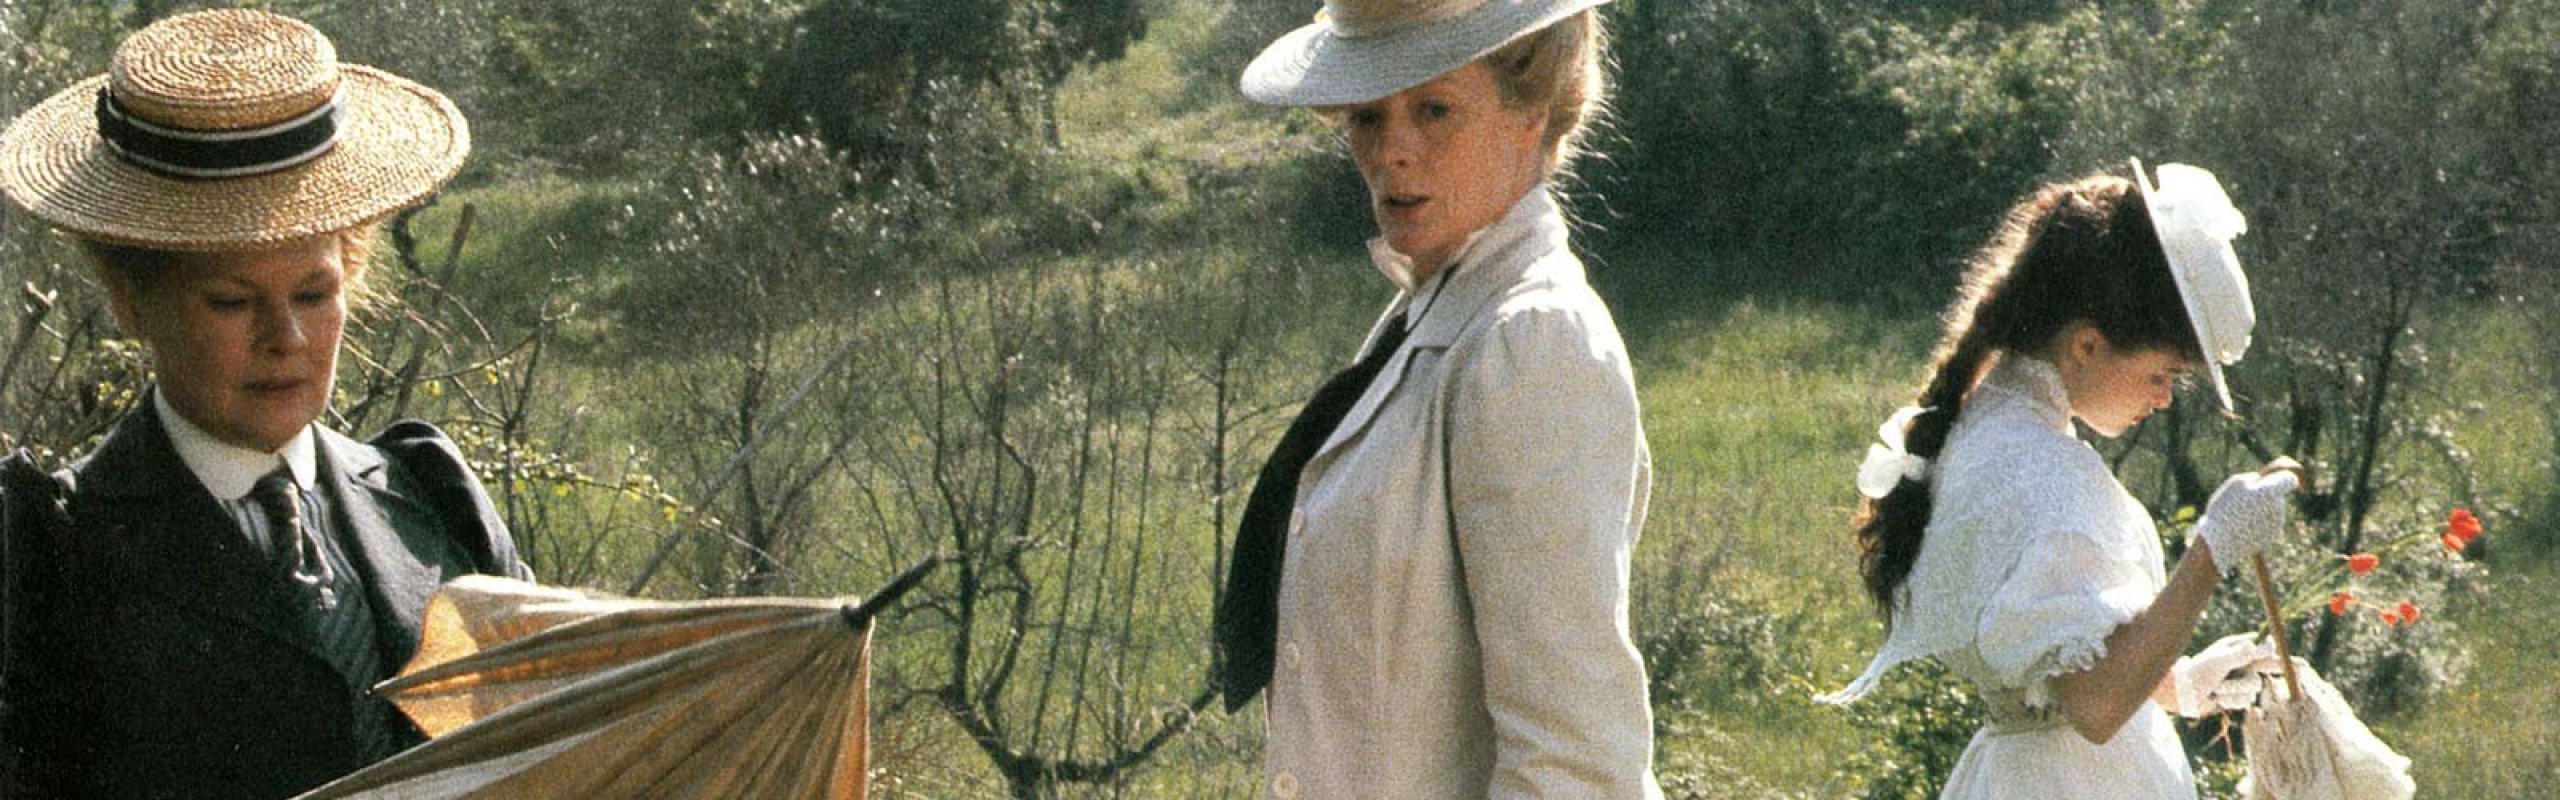 Rooms and Views: filming in Florence with Merchant Ivory